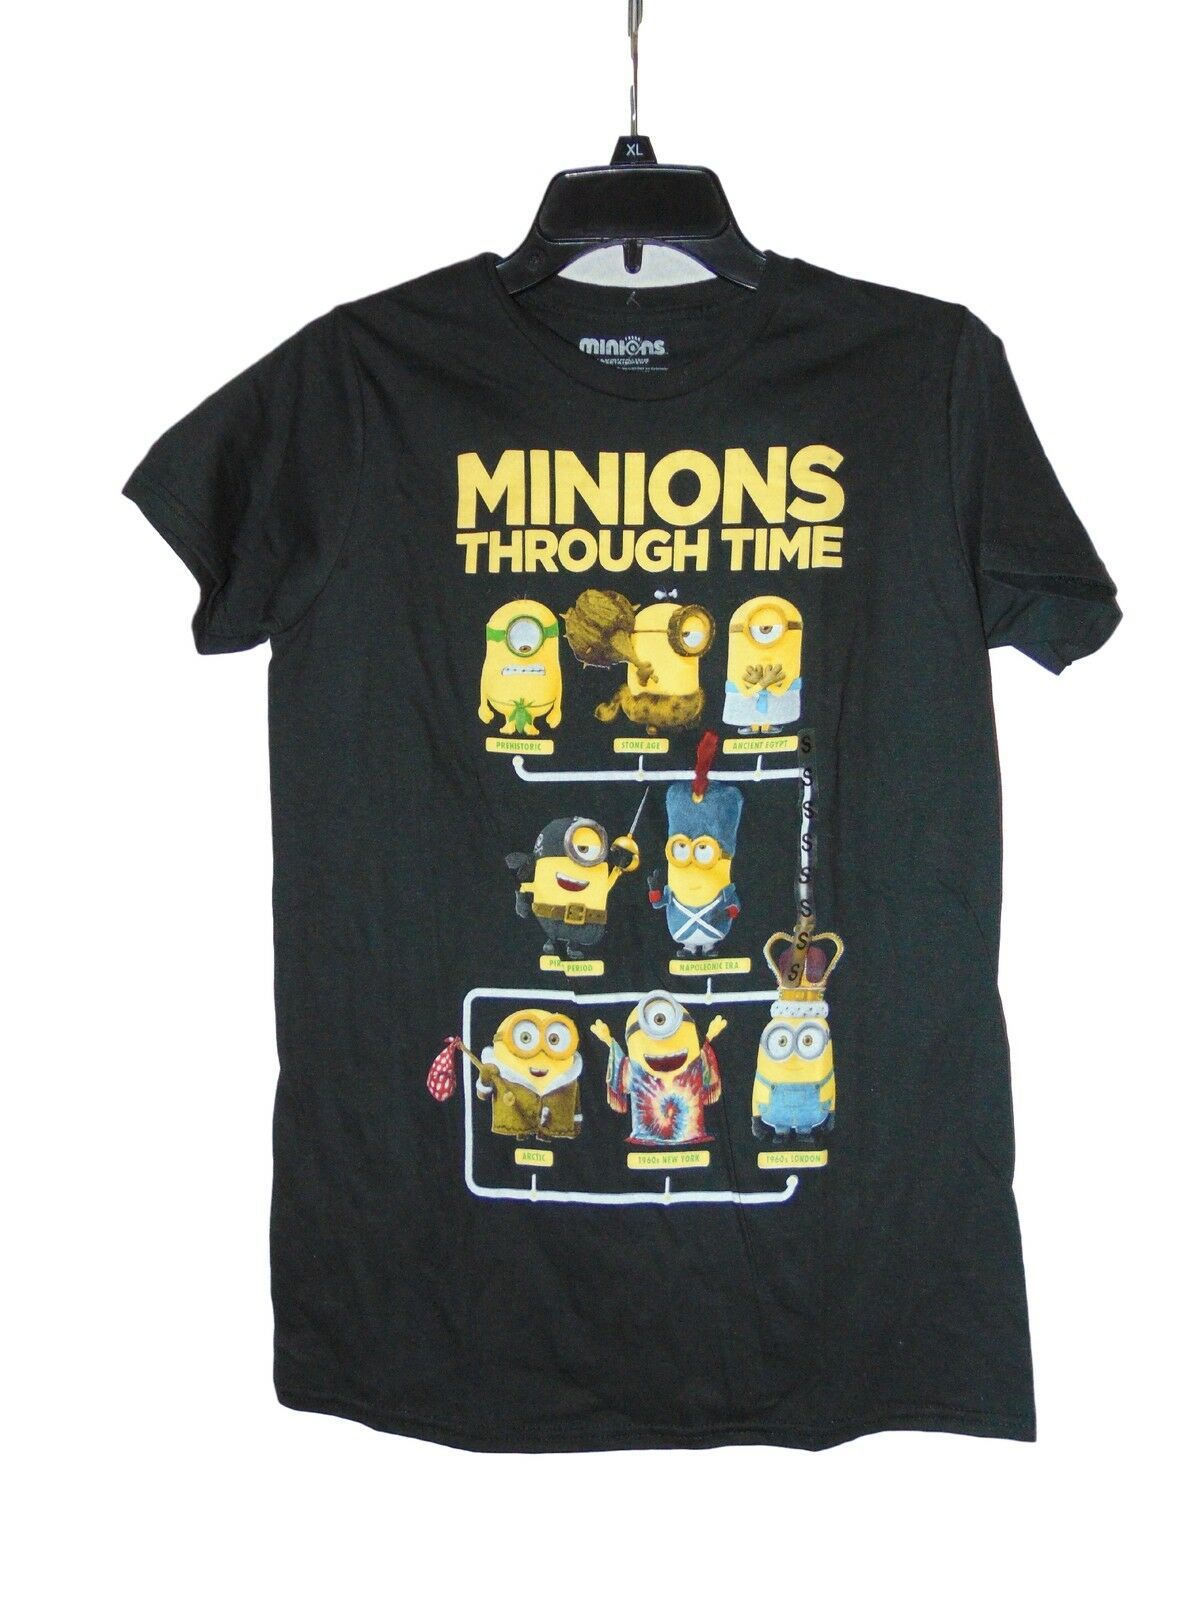 Minions Through Time T-shirt Size Small Nwot Cotton Despicable Me - T ...